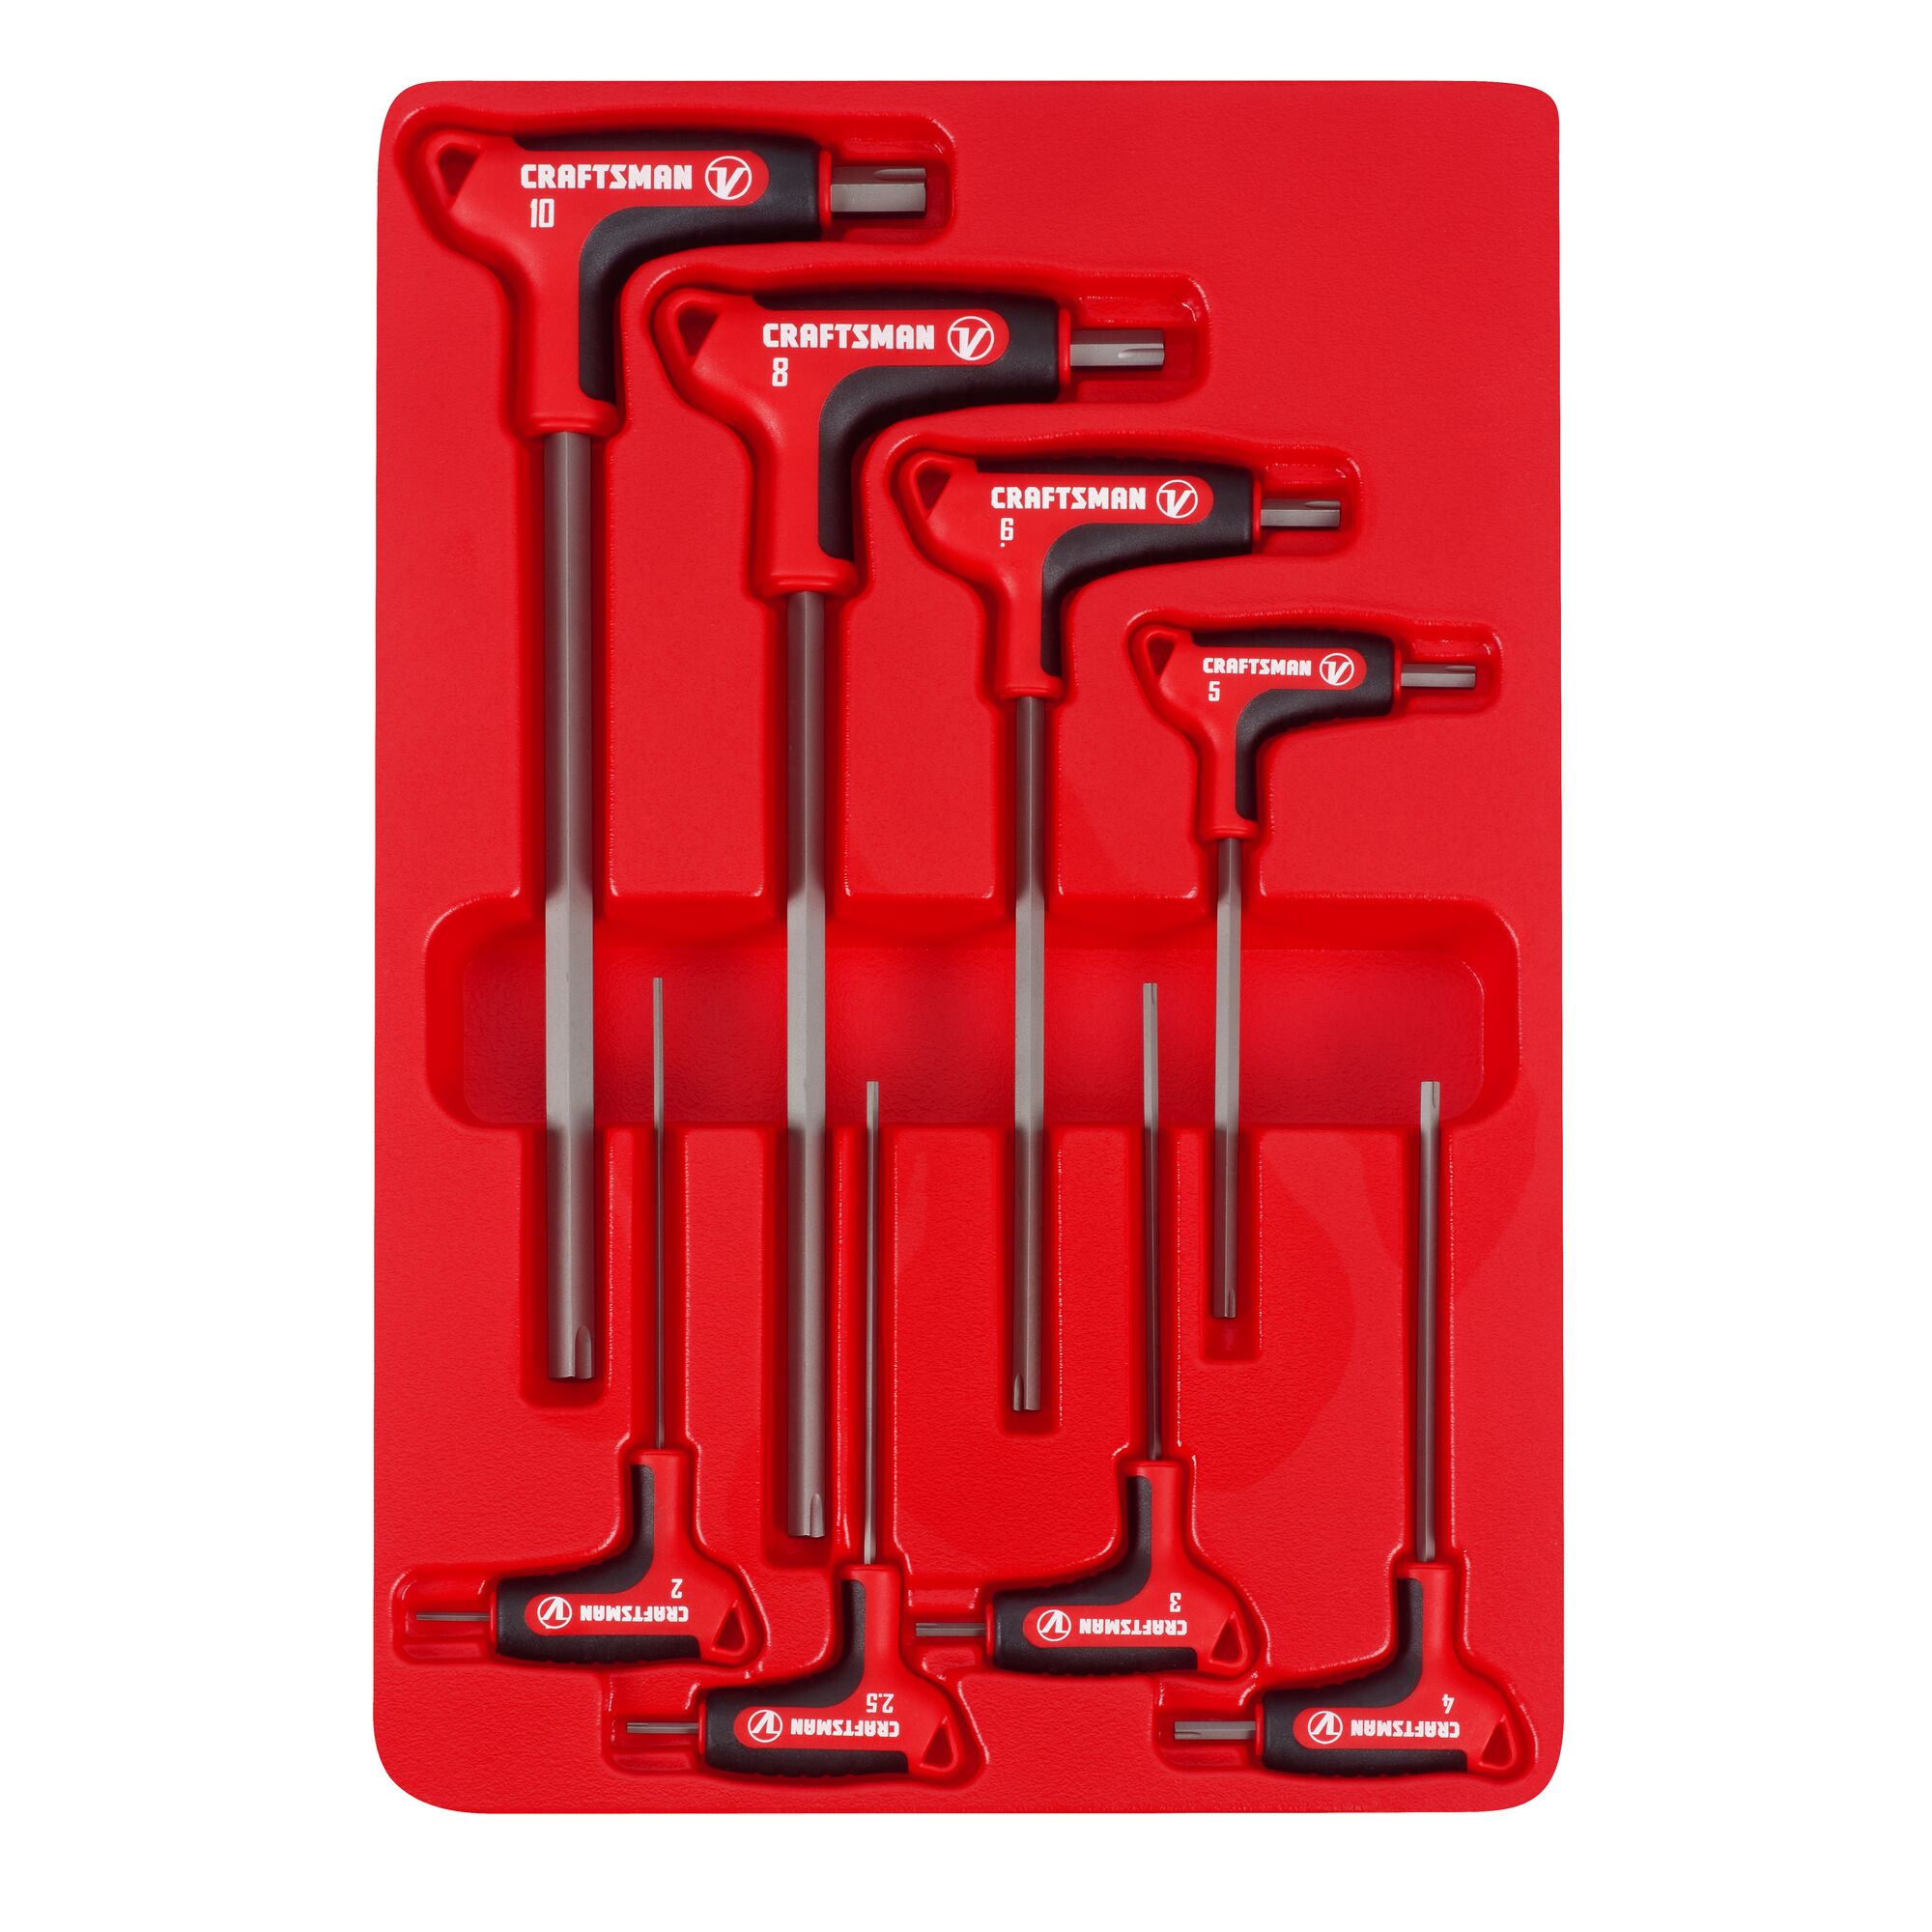 V series 8 piece x tract technology metric t handle set in plastic packaging.